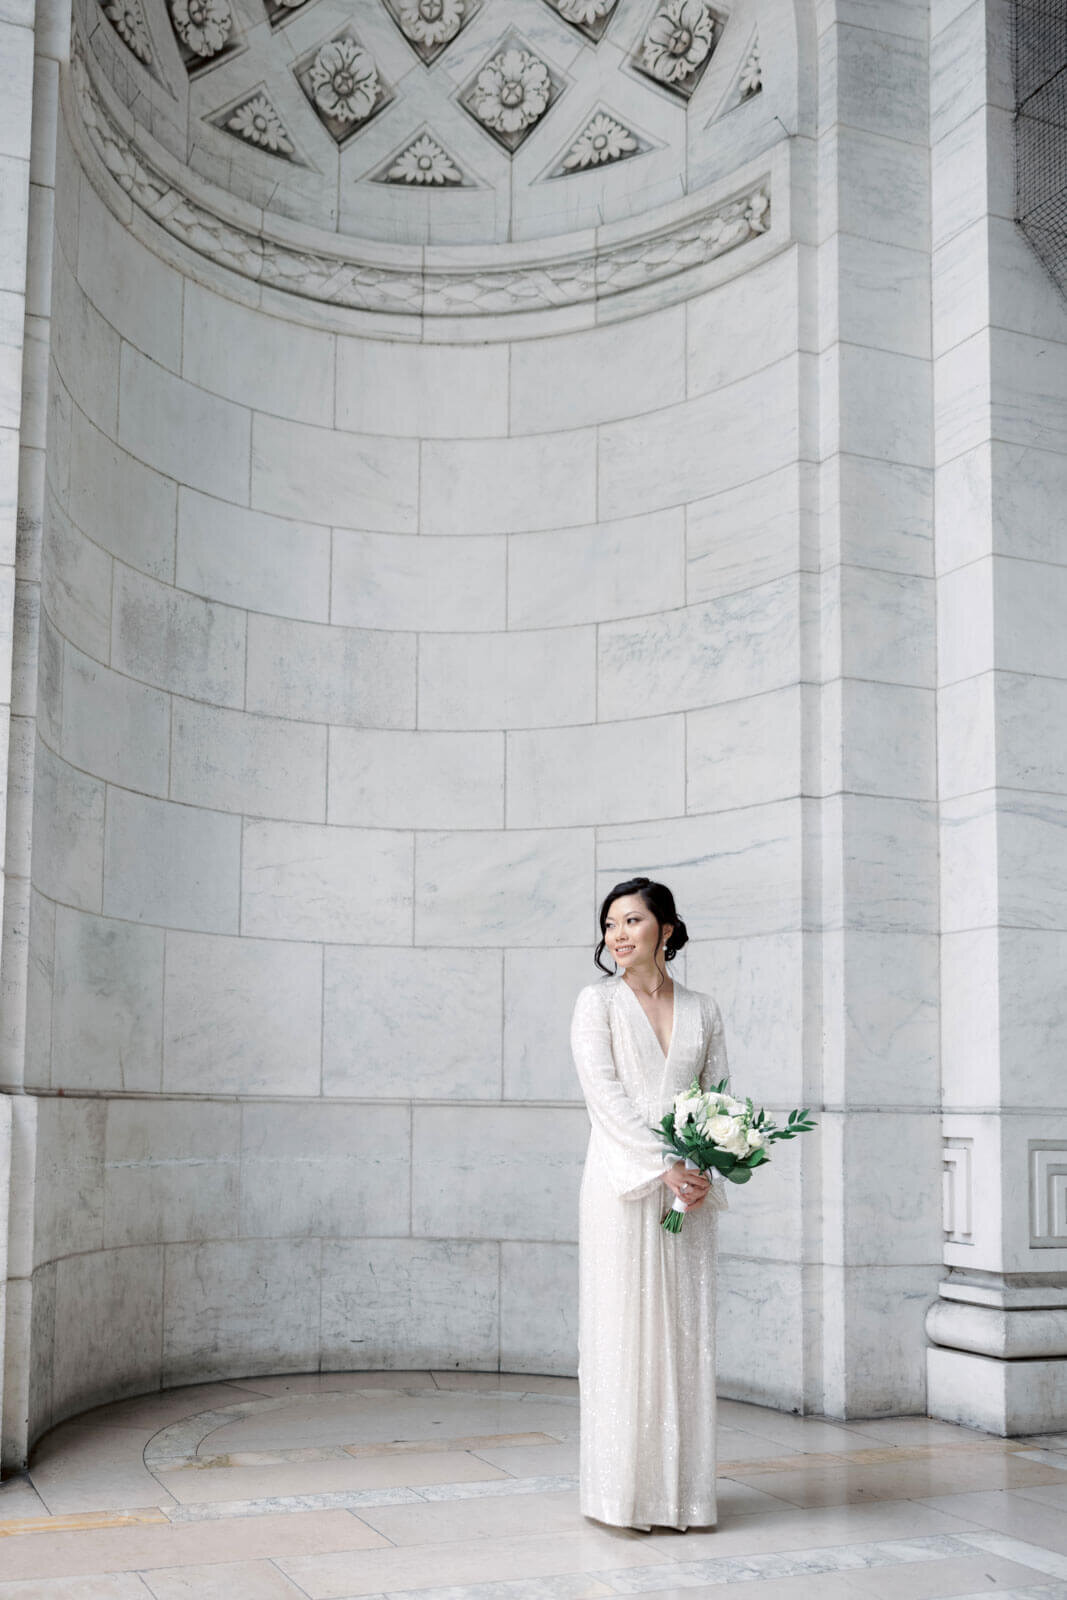 The bride is holding her flower bouquet inside the New York Public Library, NYC, with very high ceiling. Image by Jenny Fu Studio